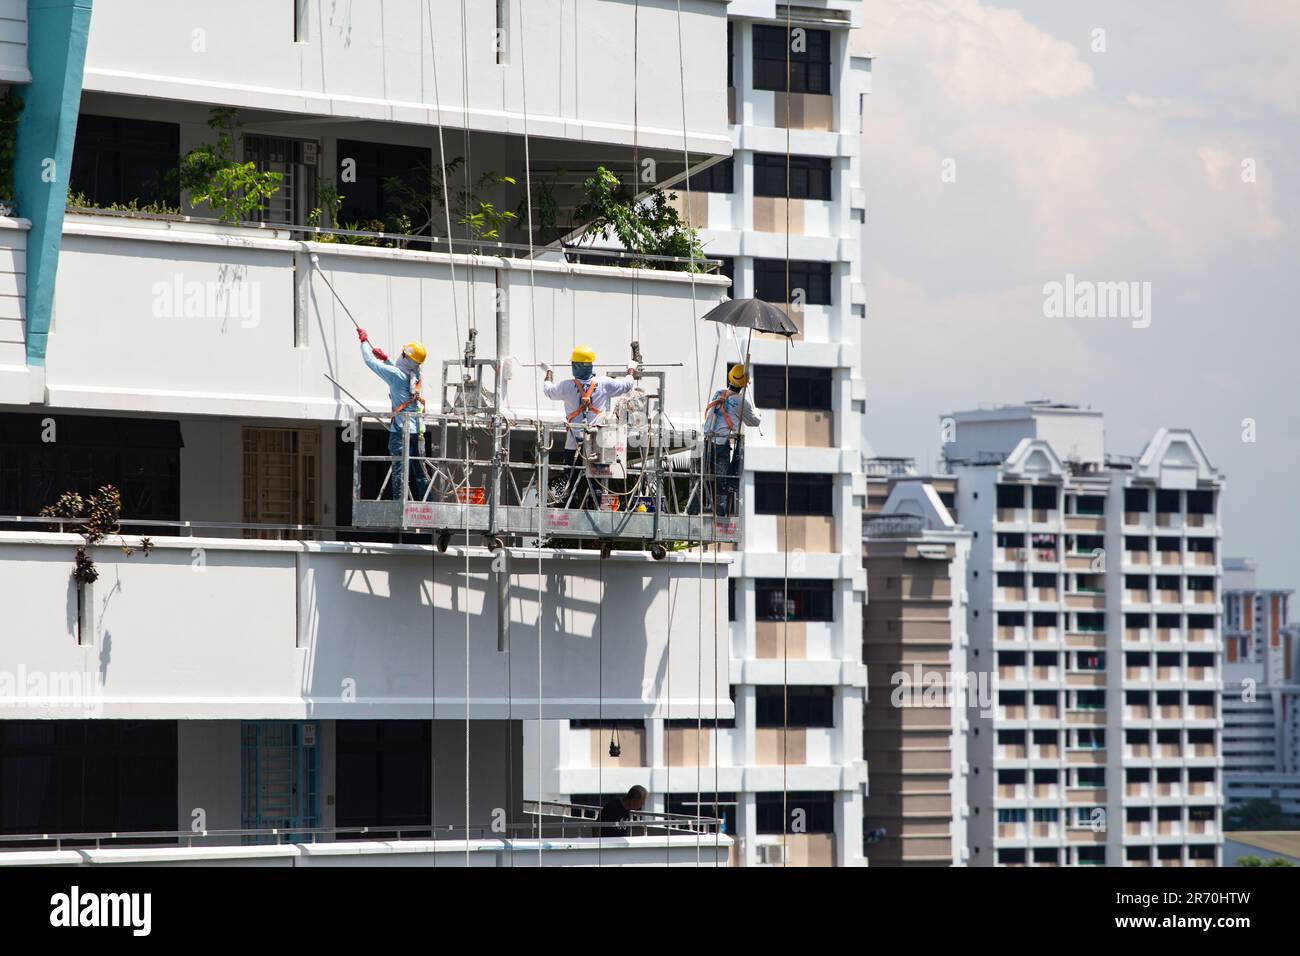 Workers using industrial lift suspended on mid air doing painting job for a building exterior under the hot sun. A very high risk occupation. Stock Photo